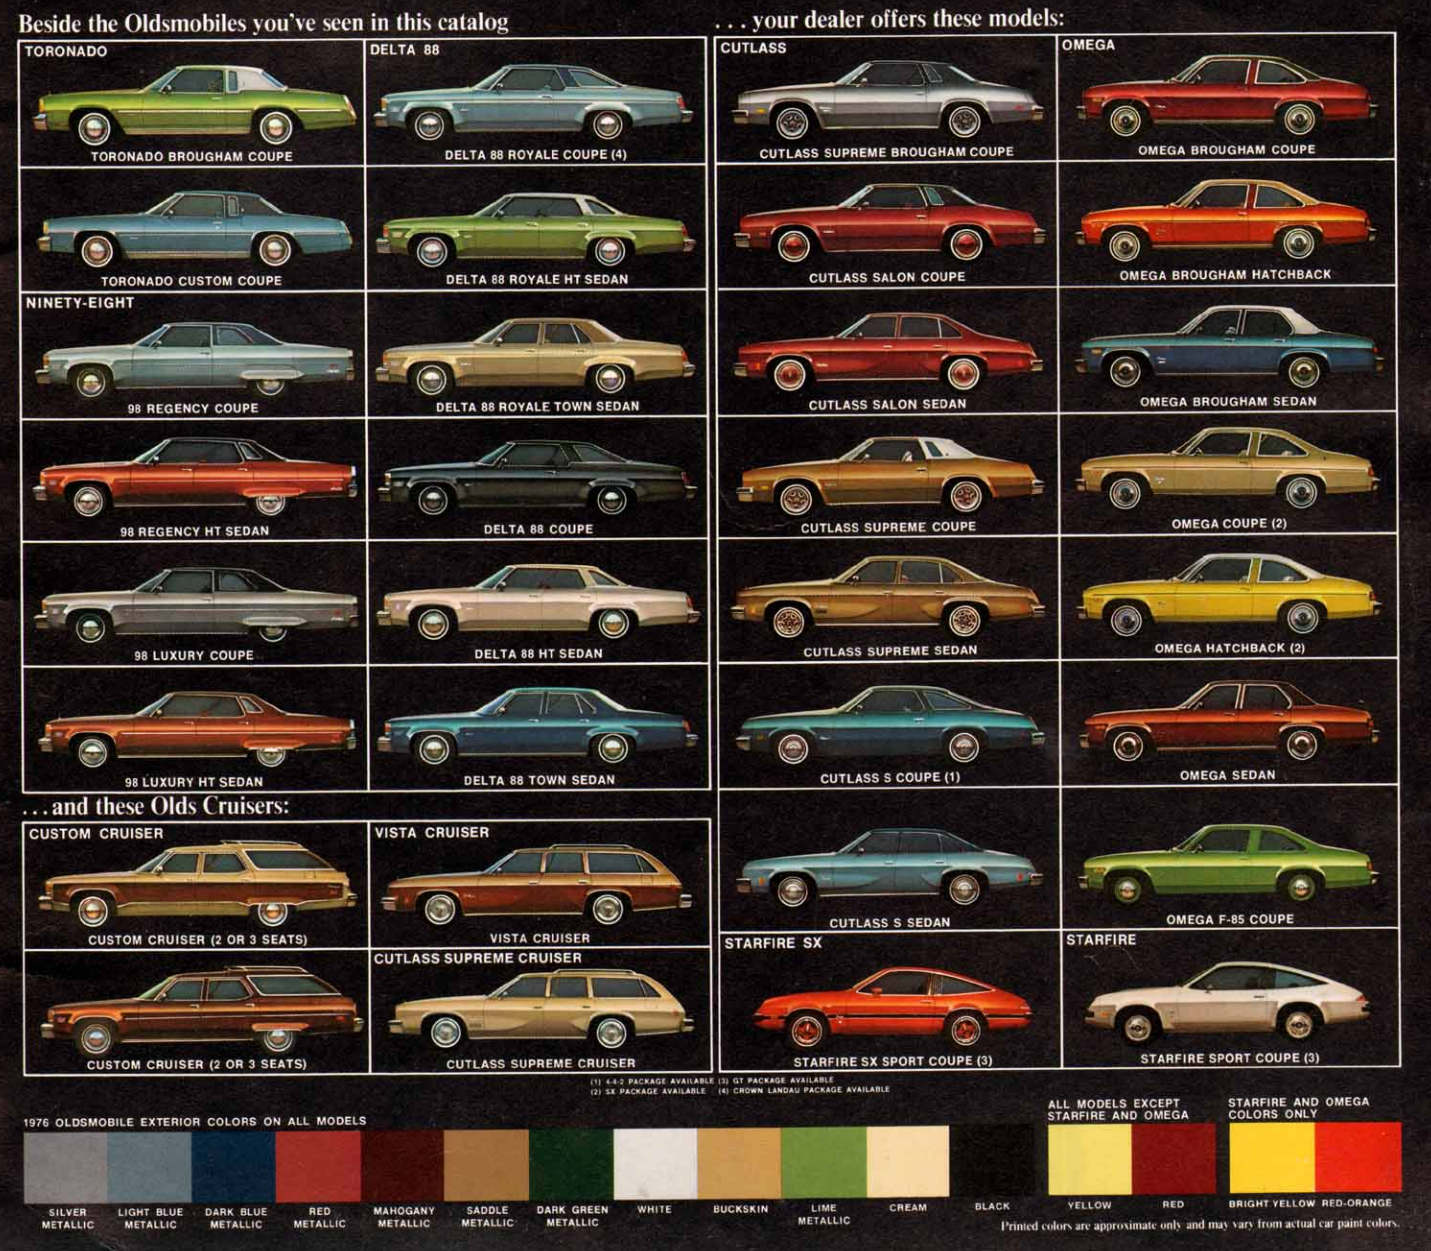 Color Swatches for 1976 oldsmobile vehicles